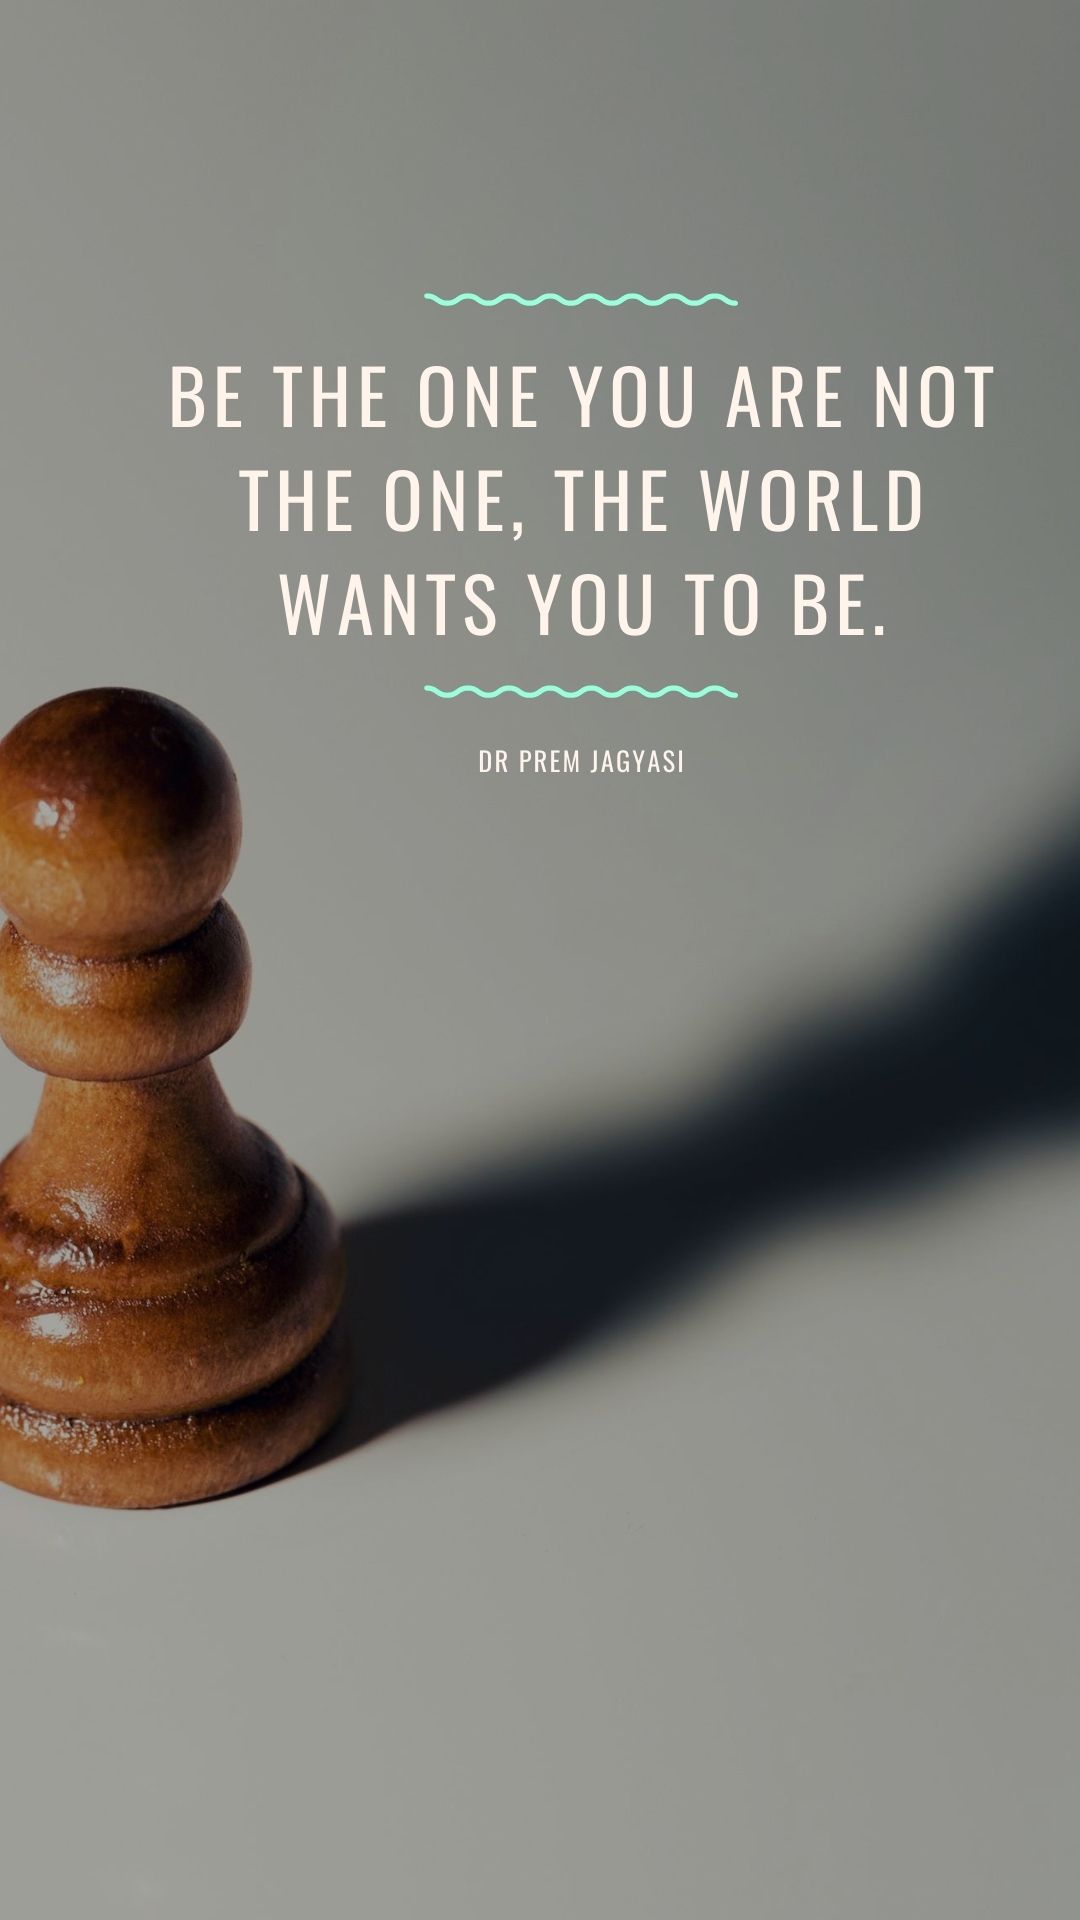 Be the one you are not the one, the world wants you to be.